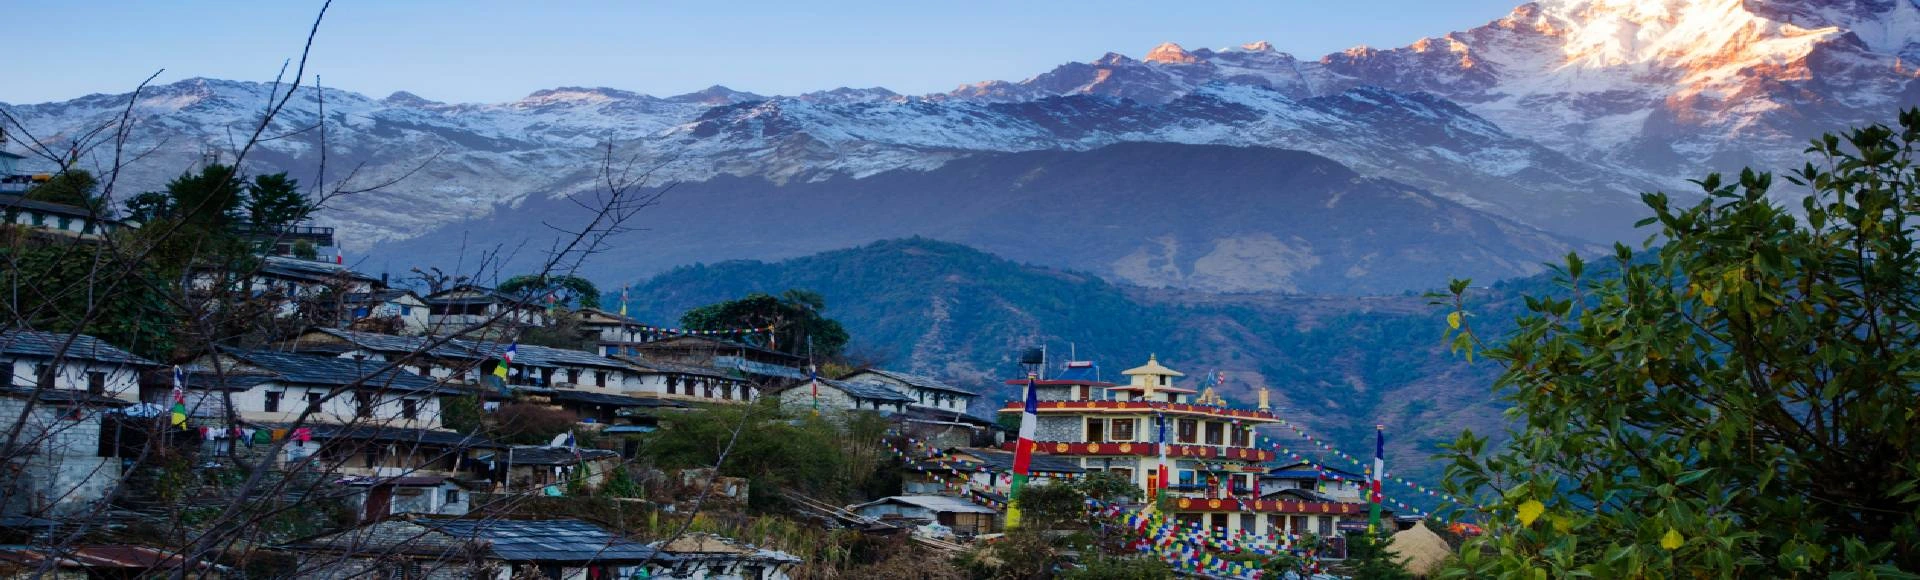 Nepal tours holiday packages